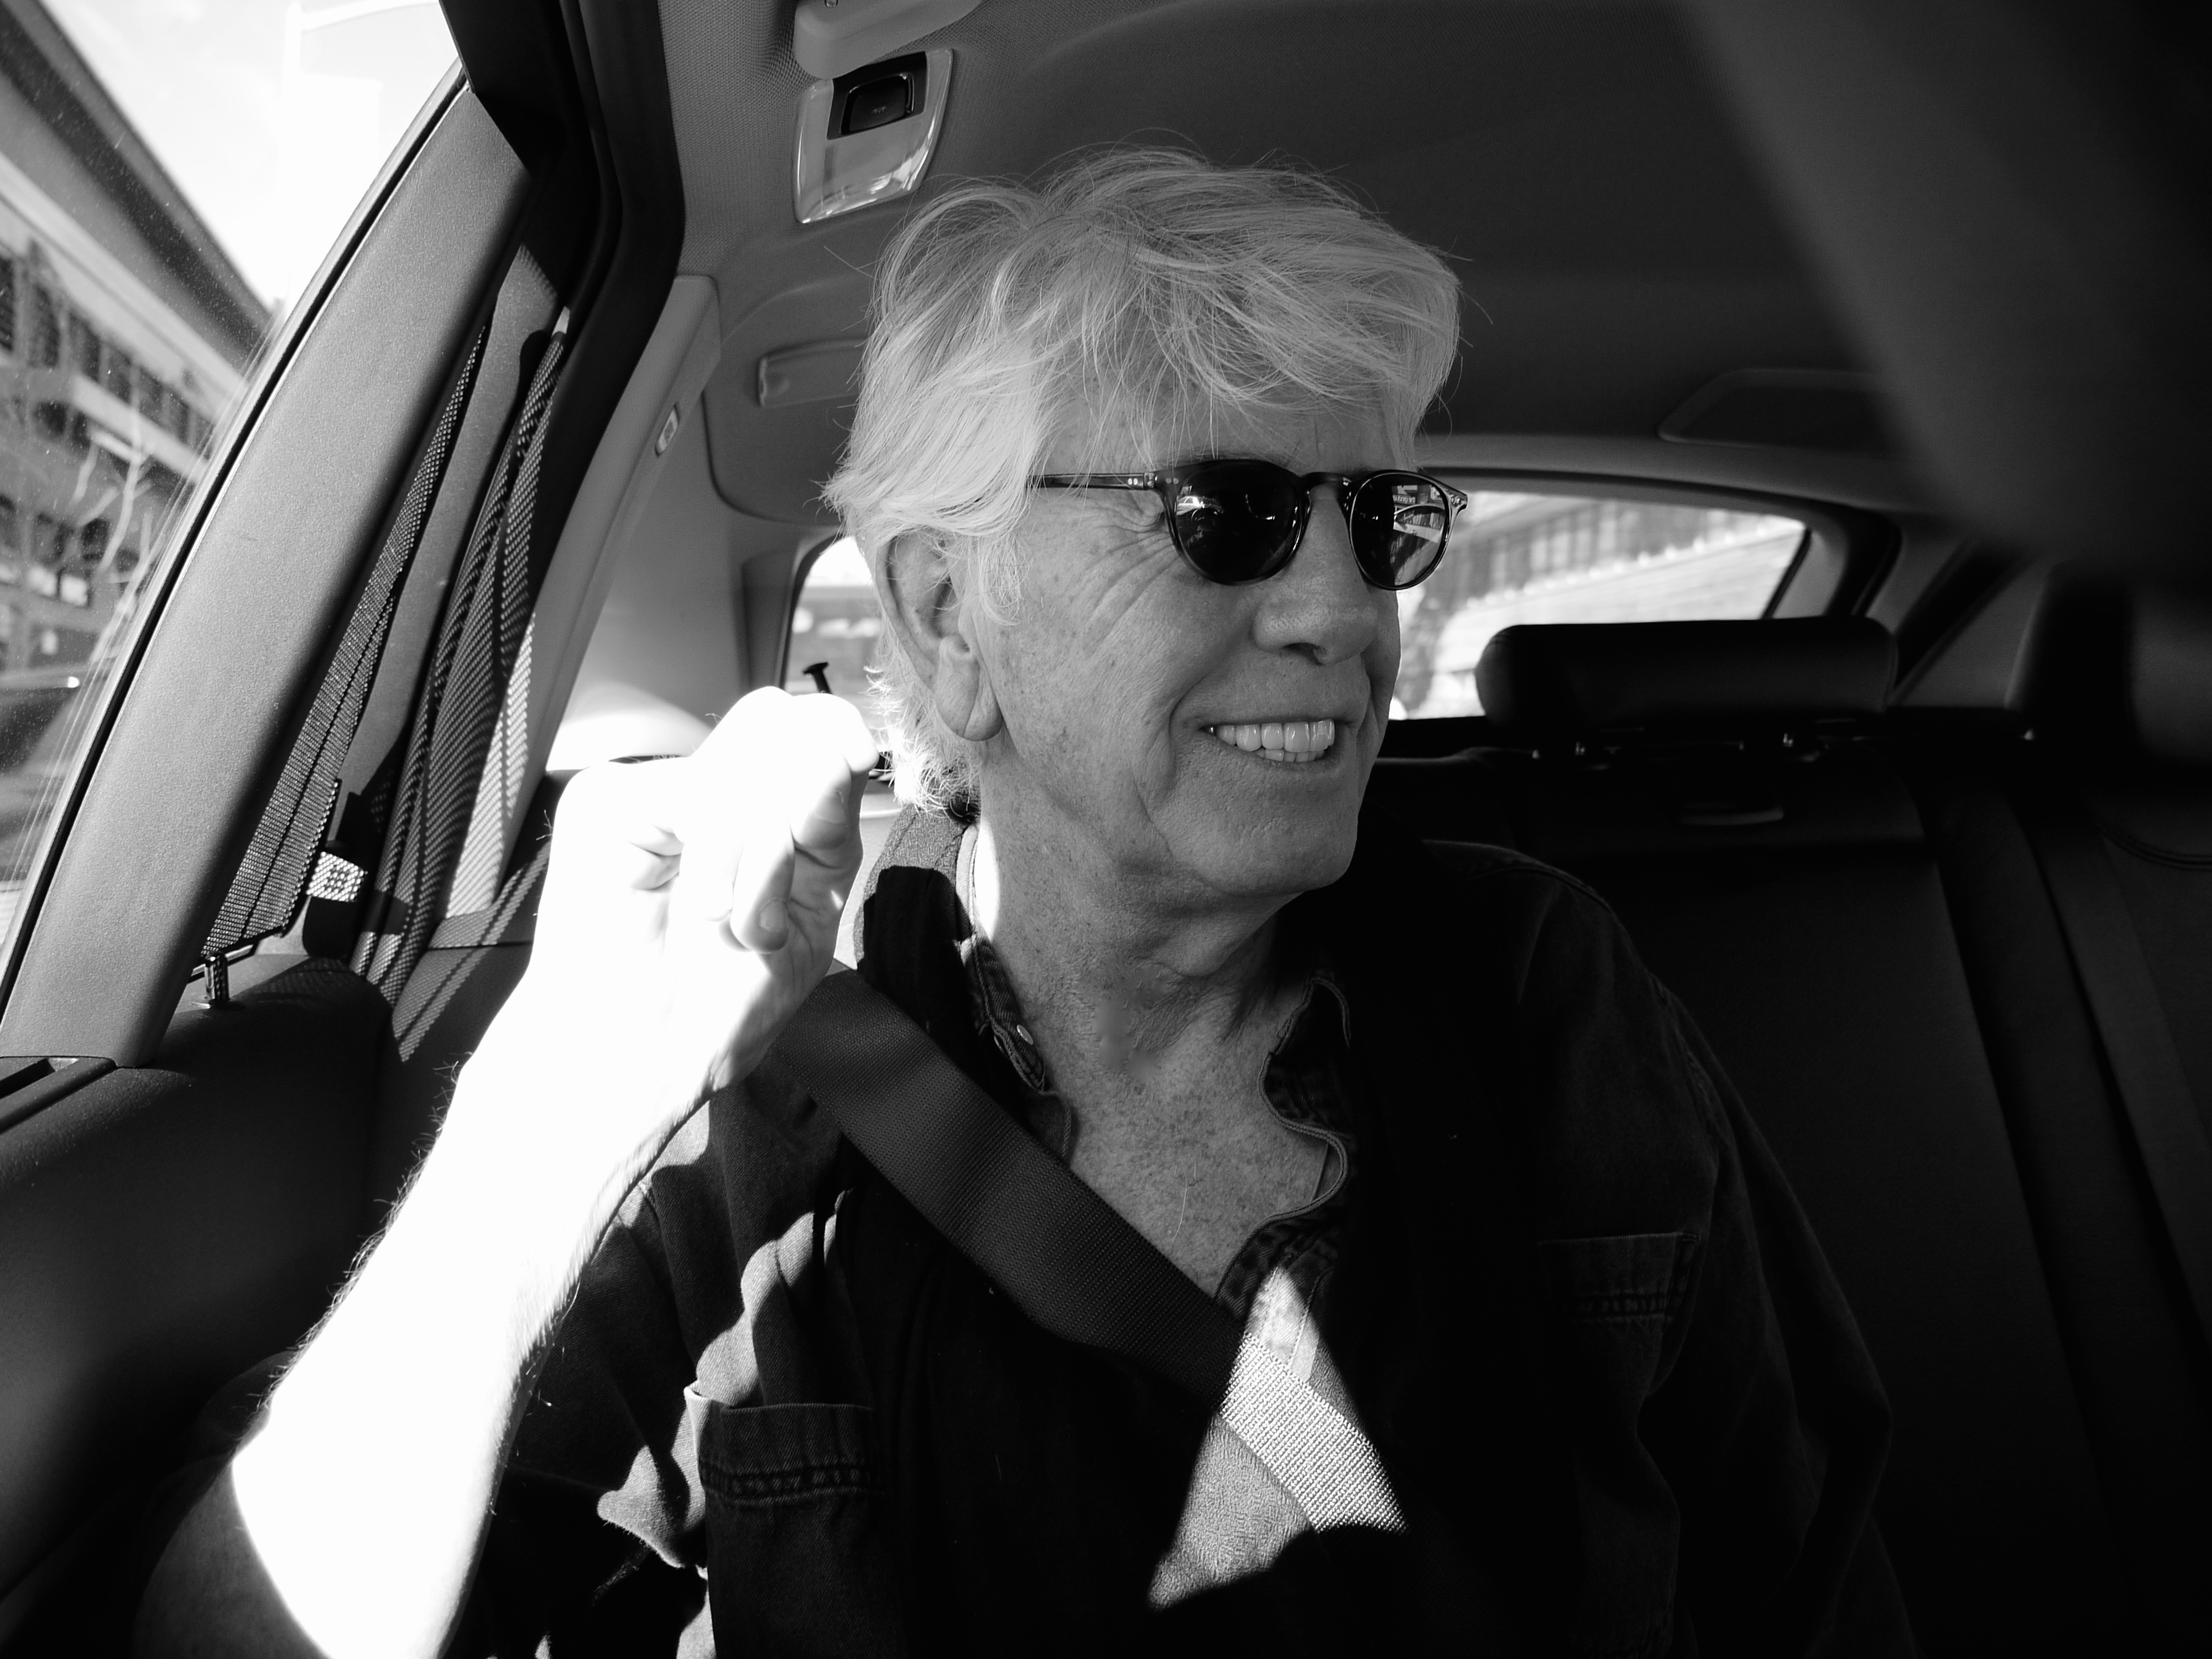 Graham Nash: A Voice of Protest Returns with Stories to Tell